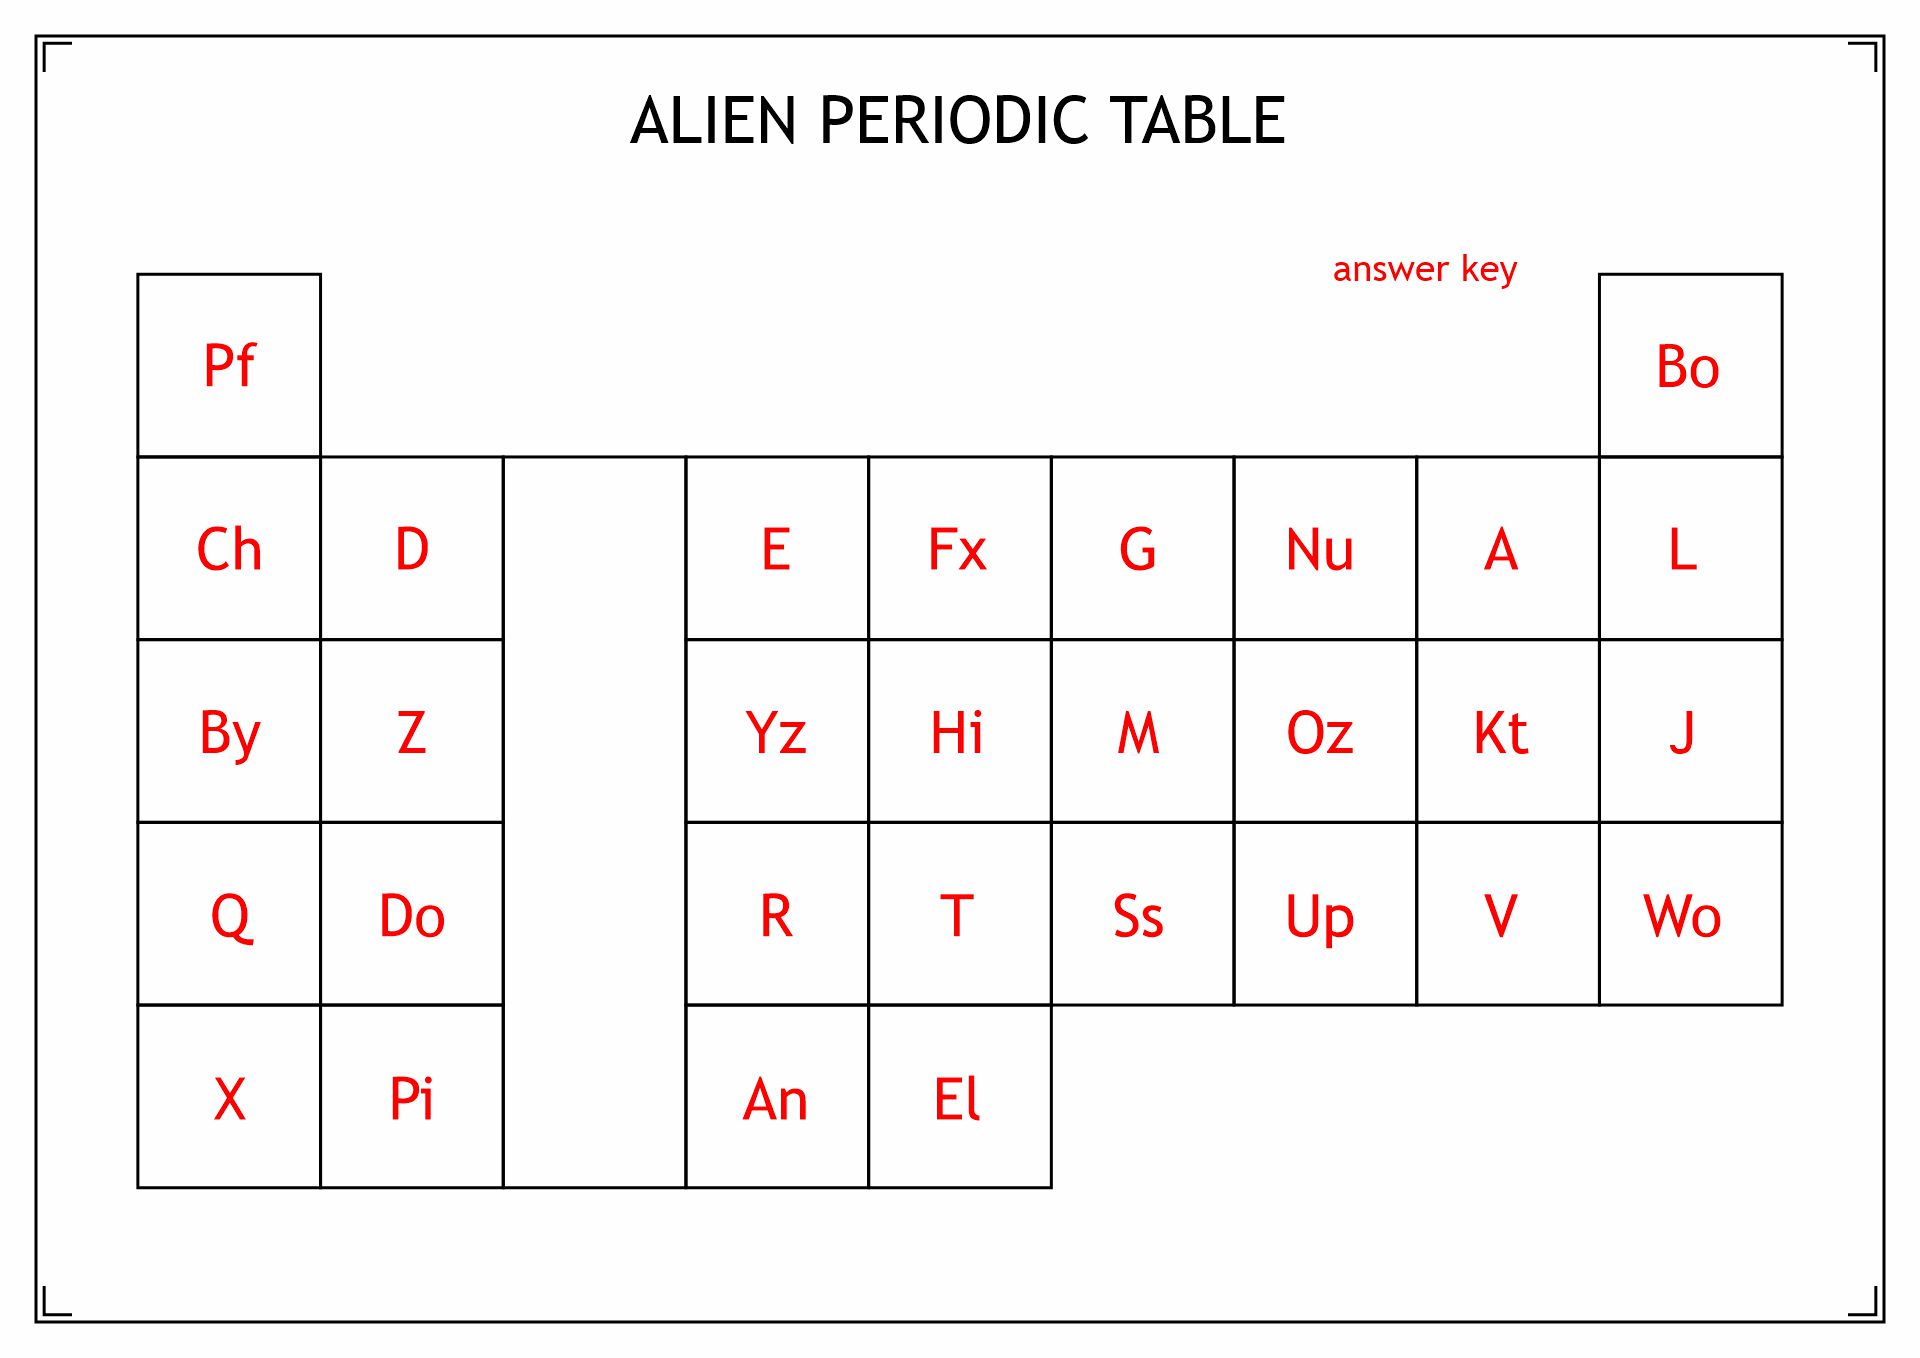 Alien Periodic Table Answers Image